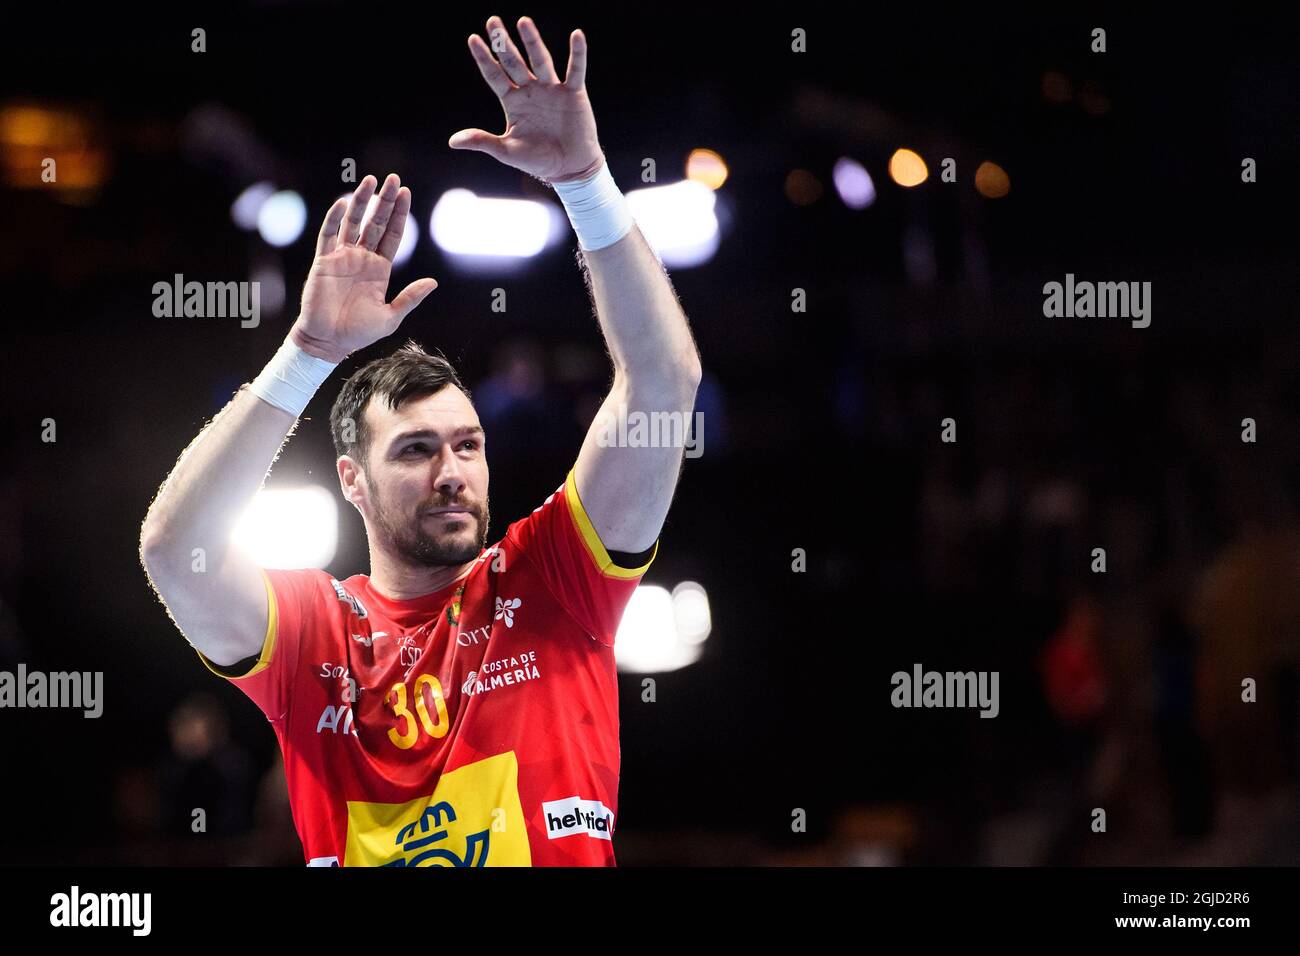 Spain's Gedeon Guardiola celebrates after wnning the semi final match Spain and Slovenia during the Men's European Handball Championship in Stockholm, Sweden, on Jan. 24, 2020. Photo: Erik Simander / TT code 11720  Stock Photo